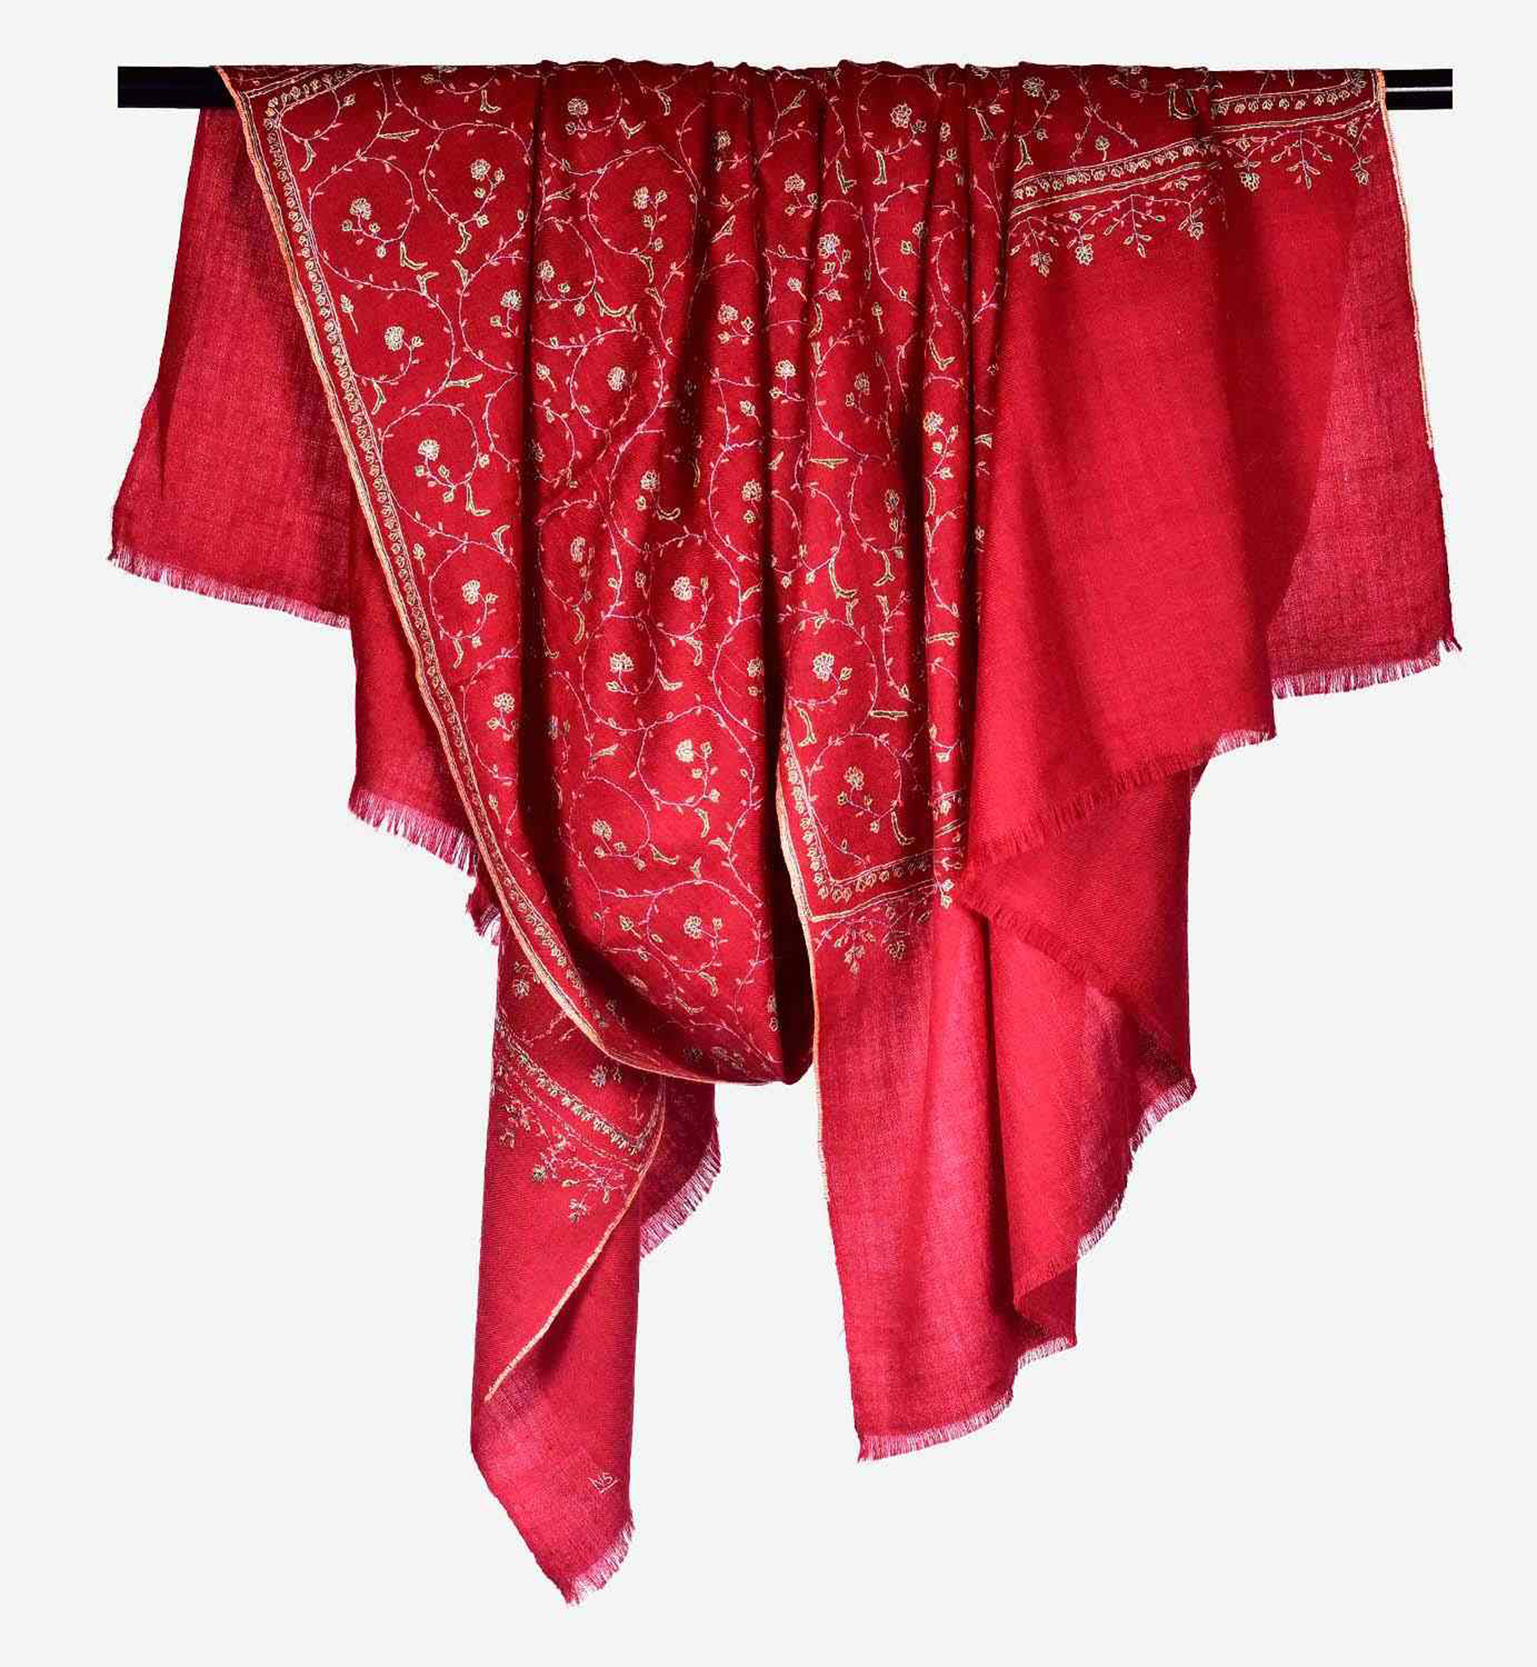 All Things Kashmir to Restore the Glory of Pashmina Shawls in India